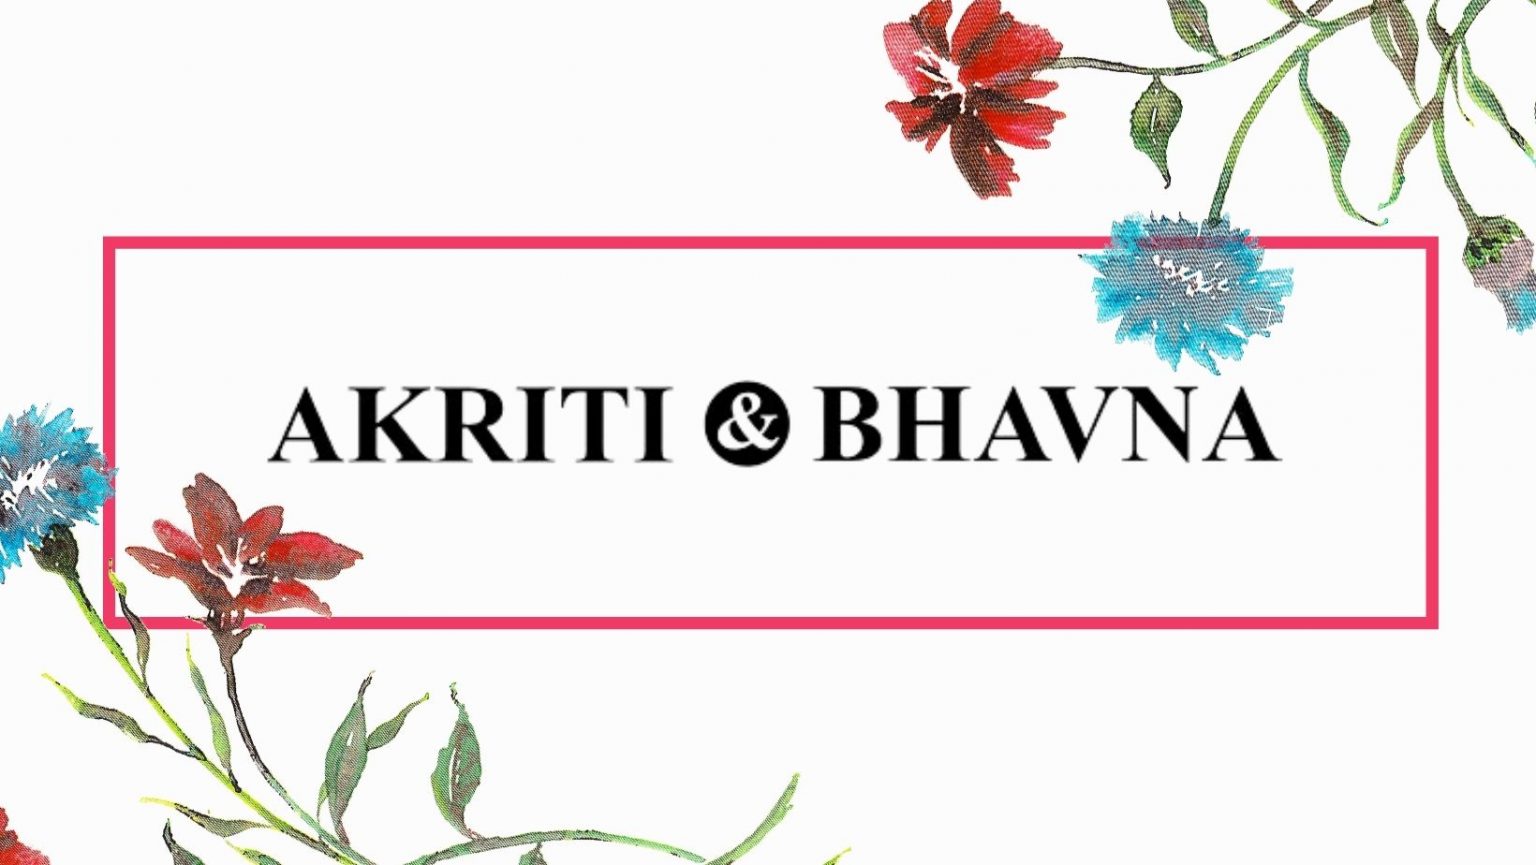 Interview with co-founders of 'Labels of Akriti & Bhavna'